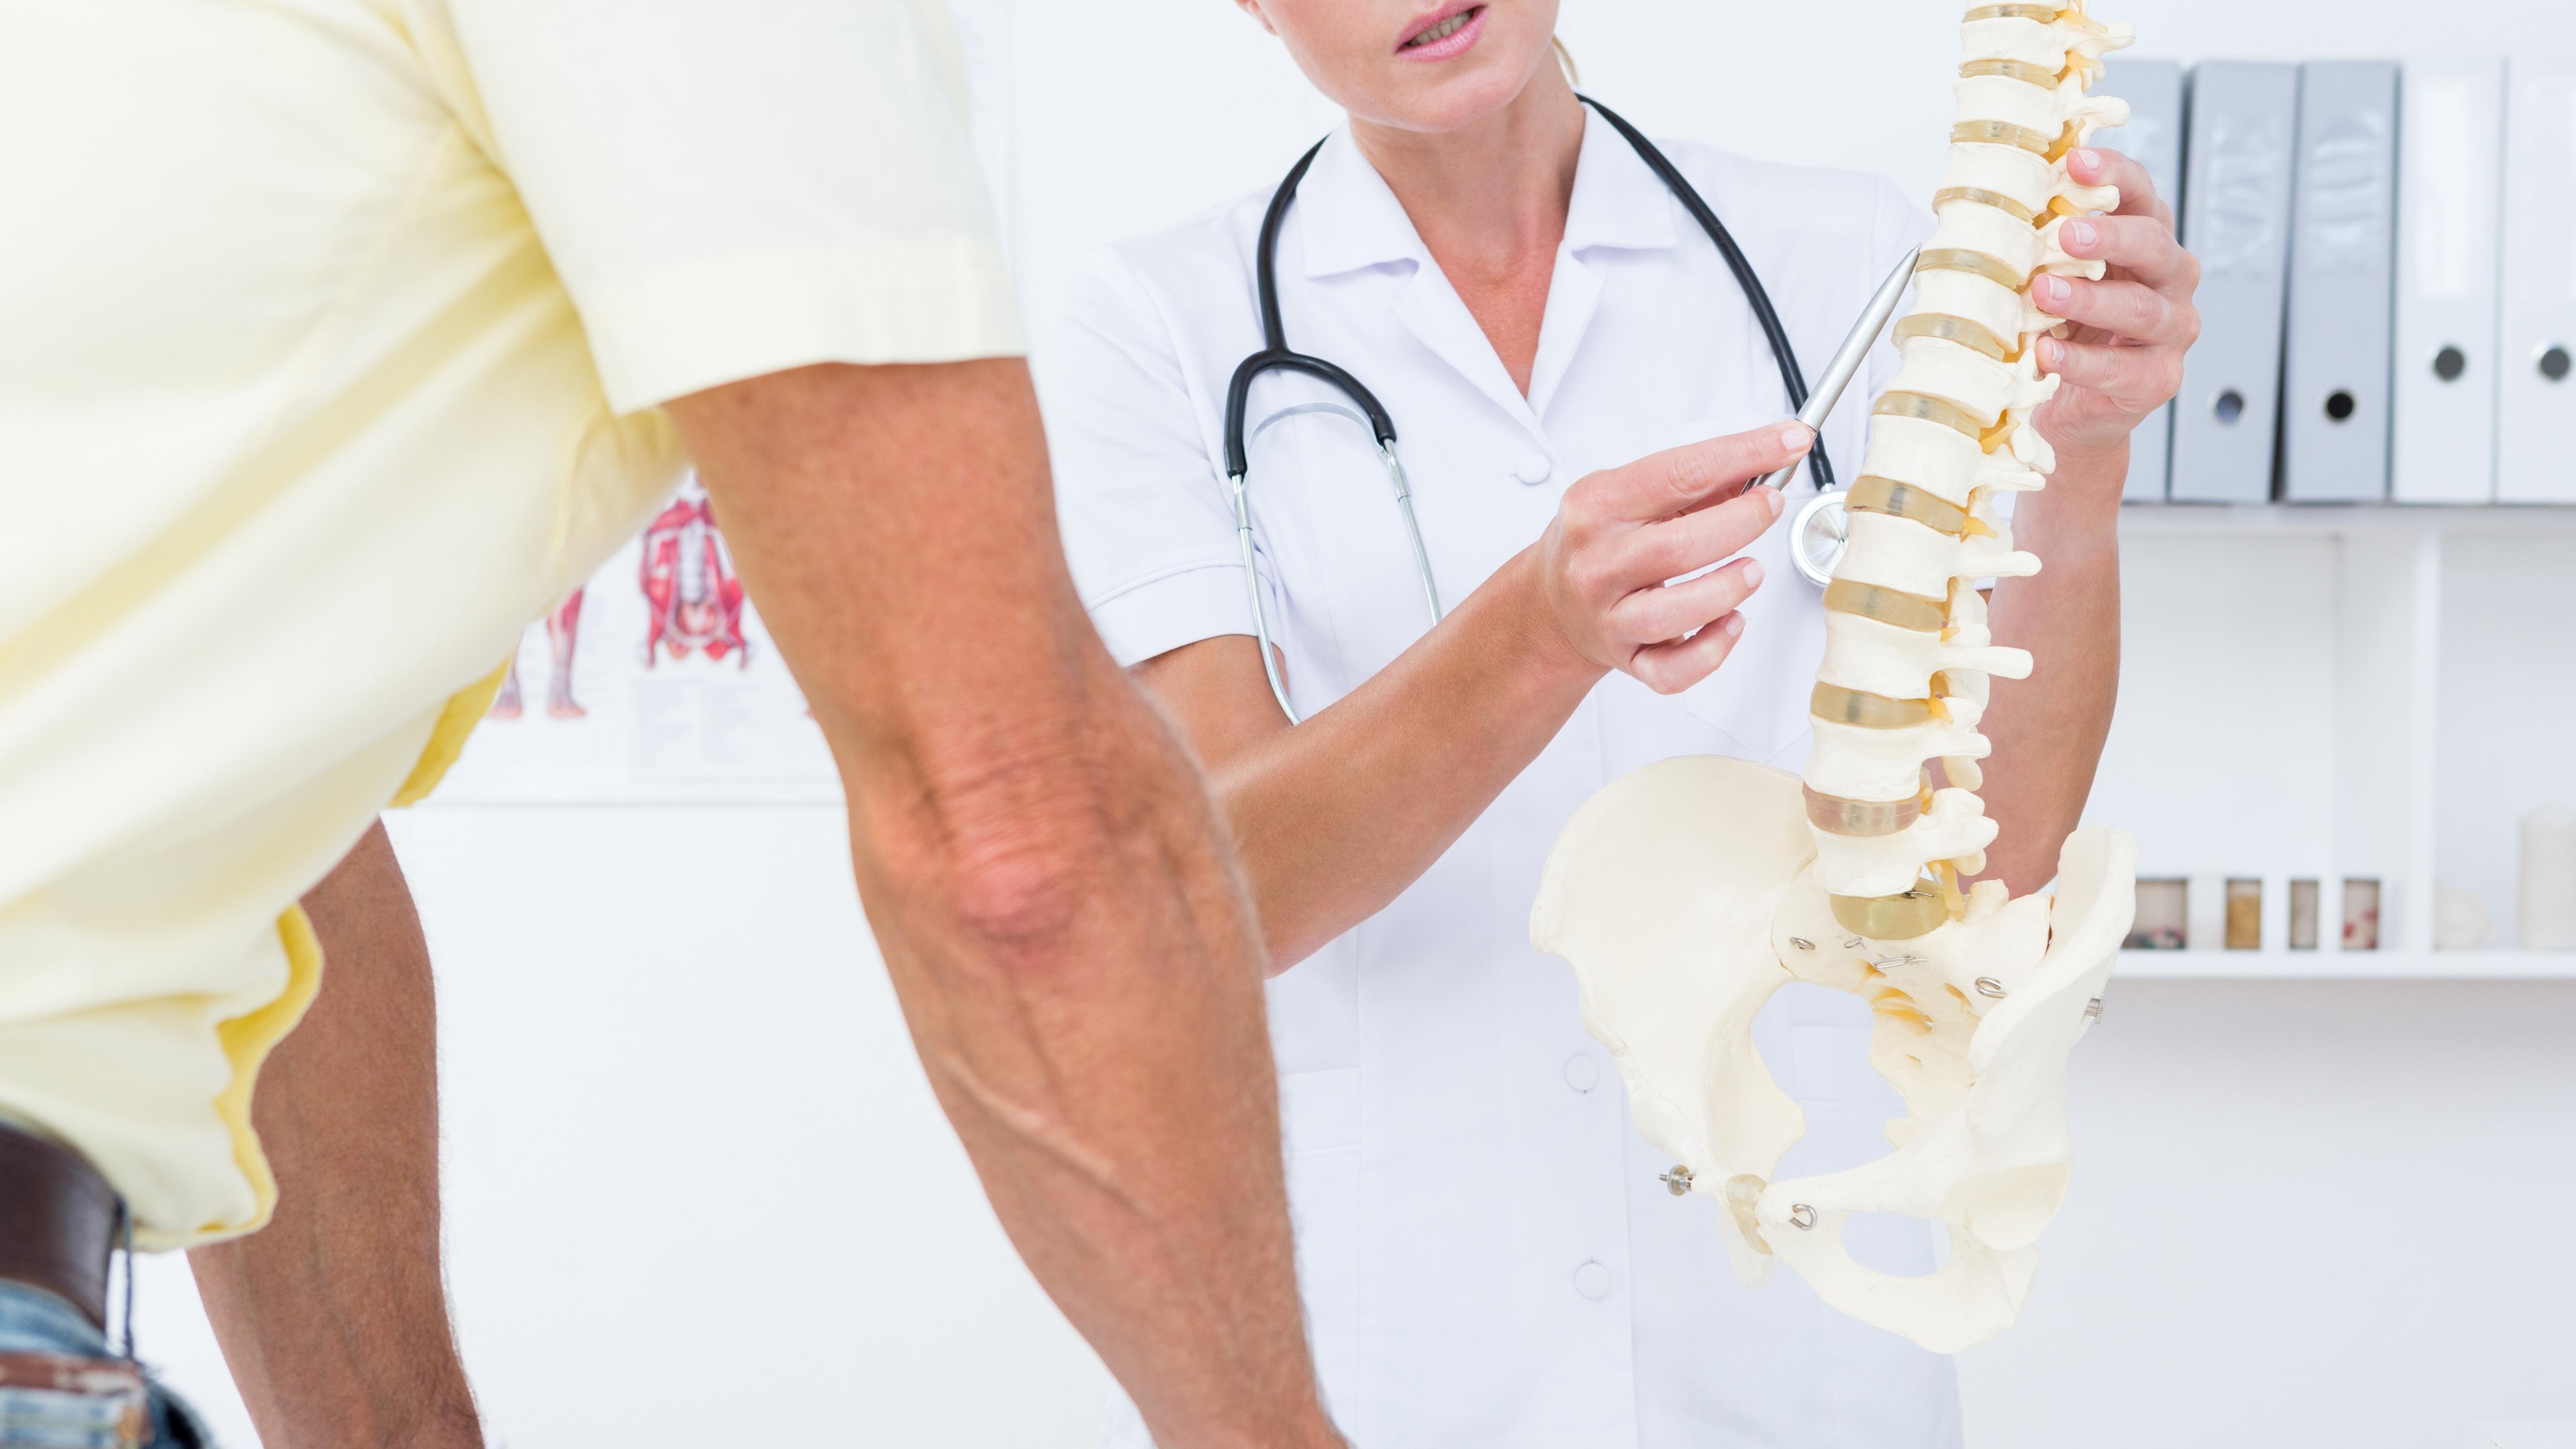 Spine and Sports Chiropractic/Chiropractors                                                                                                                                                                                           